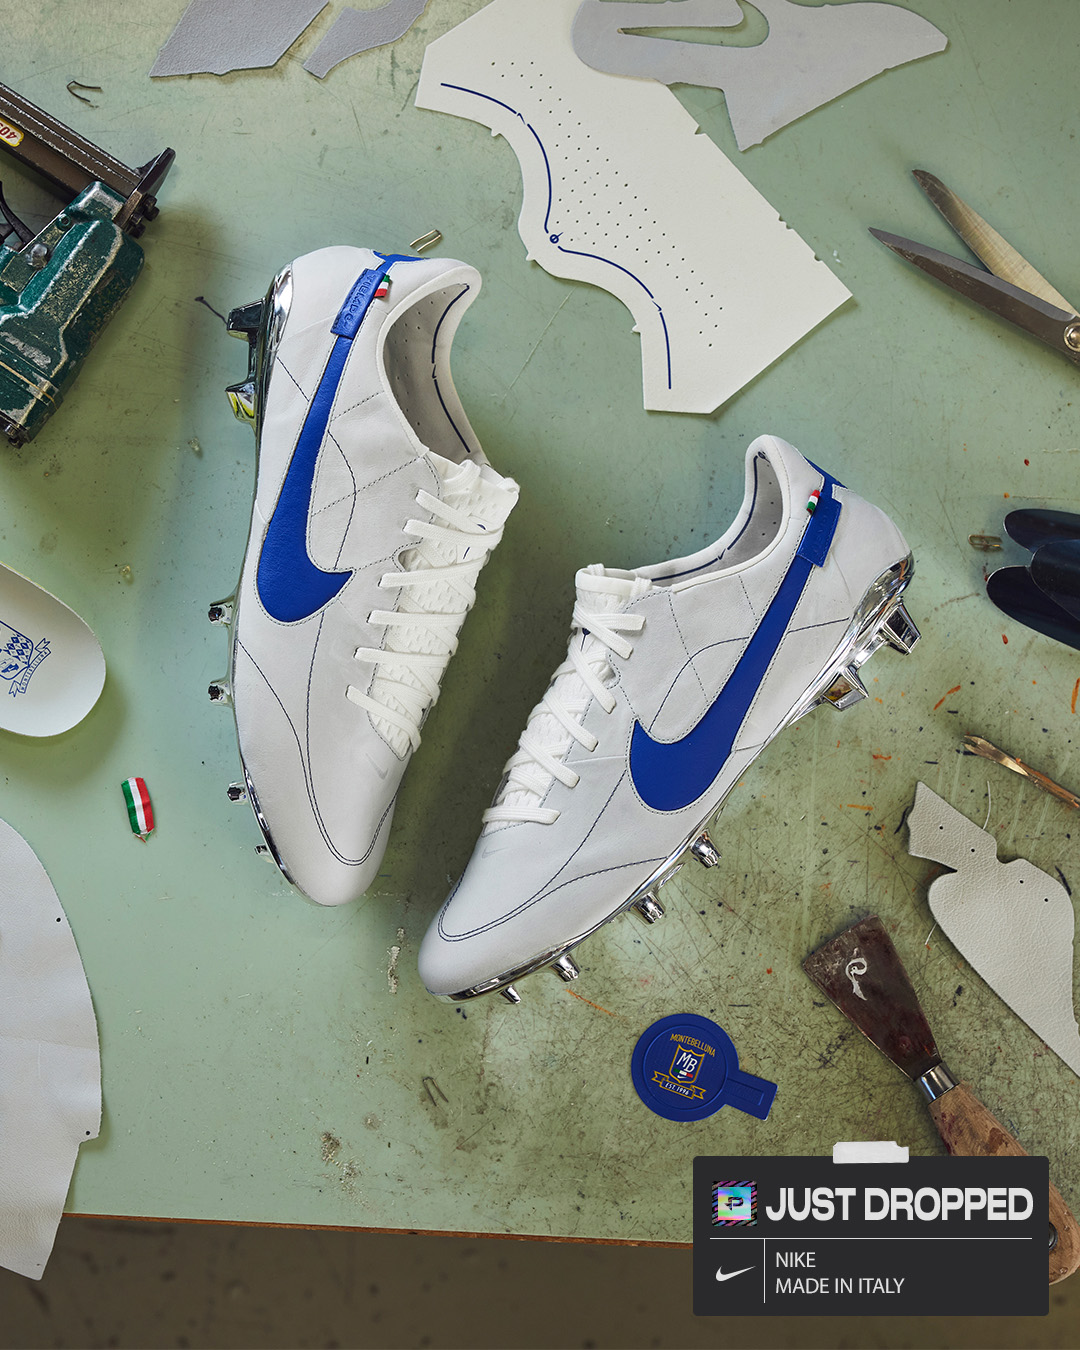 Pro:Direct Soccer on Twitter: "JUST DROPPED 🔥 https://t.co/EwxBzeBUp5 The Nike Tiempo Legend IX Made In Italy special boot is available now at Pro:Direct Soccer 🛒 https://t.co/VIeb0JCXt5" / Twitter